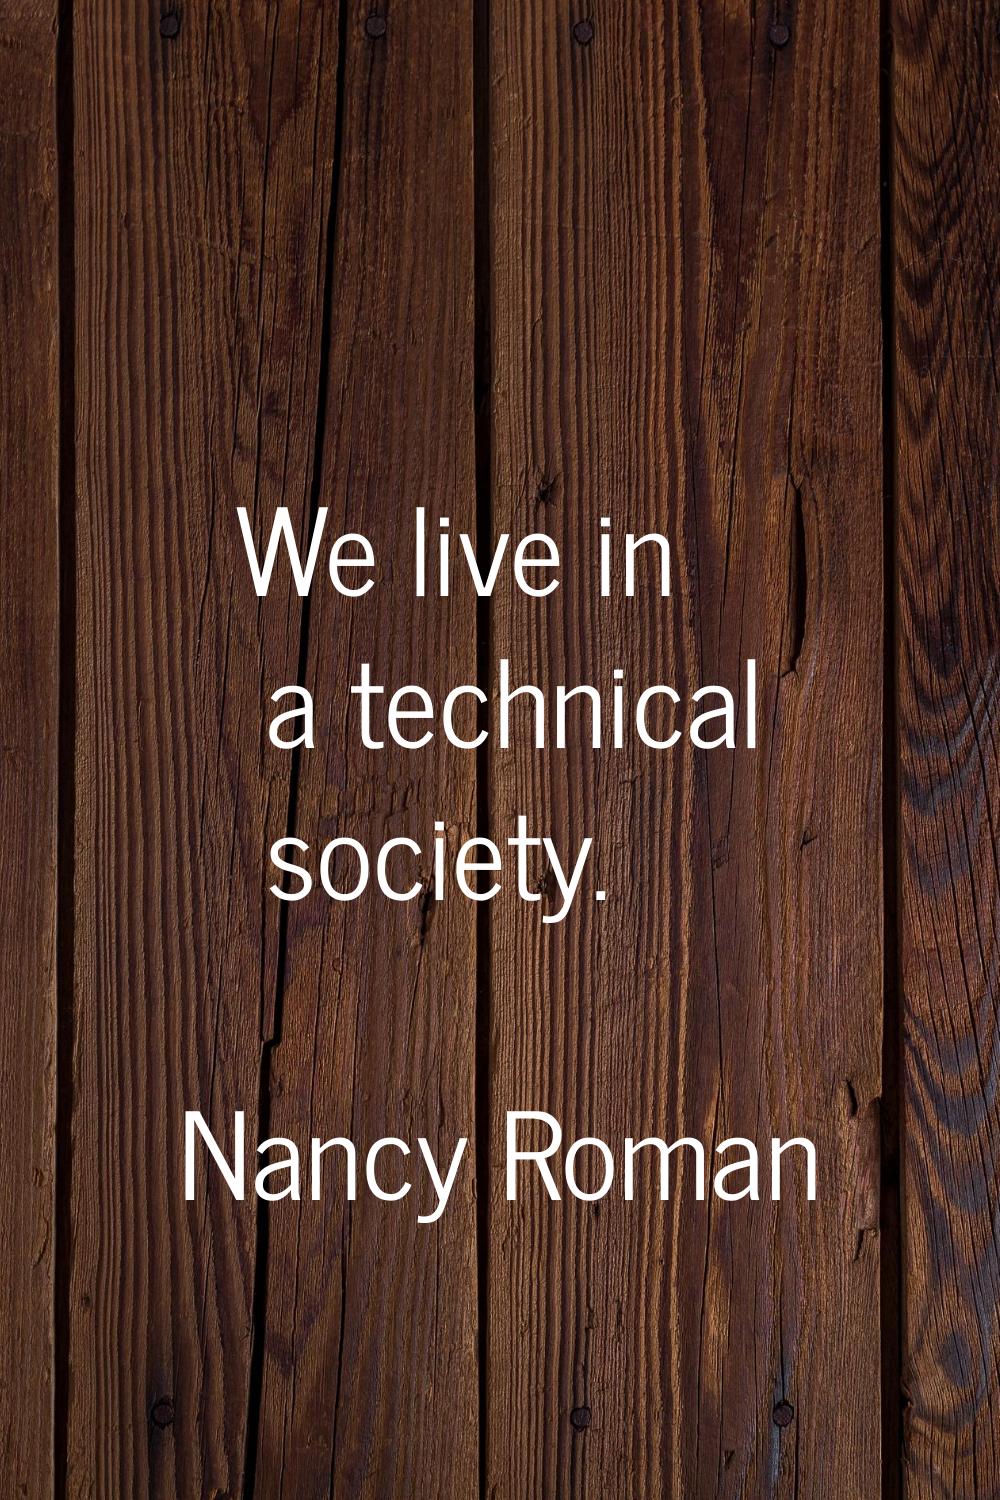 We live in a technical society.